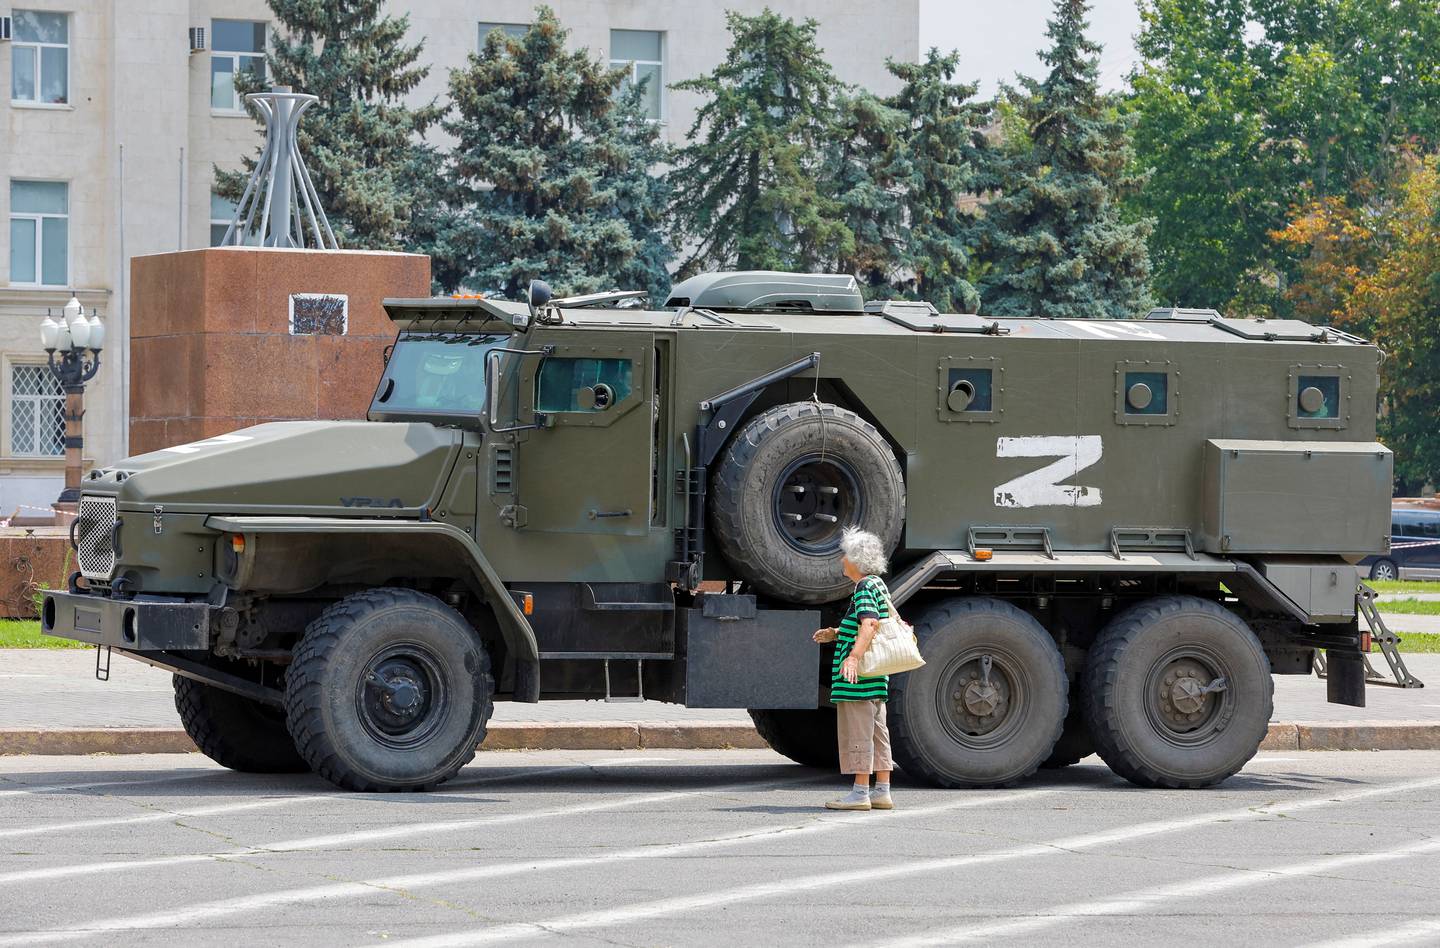 An armoured vehicle used by Russian troops parked in the Russian-controlled city of Kherson, Ukraine. Reuters